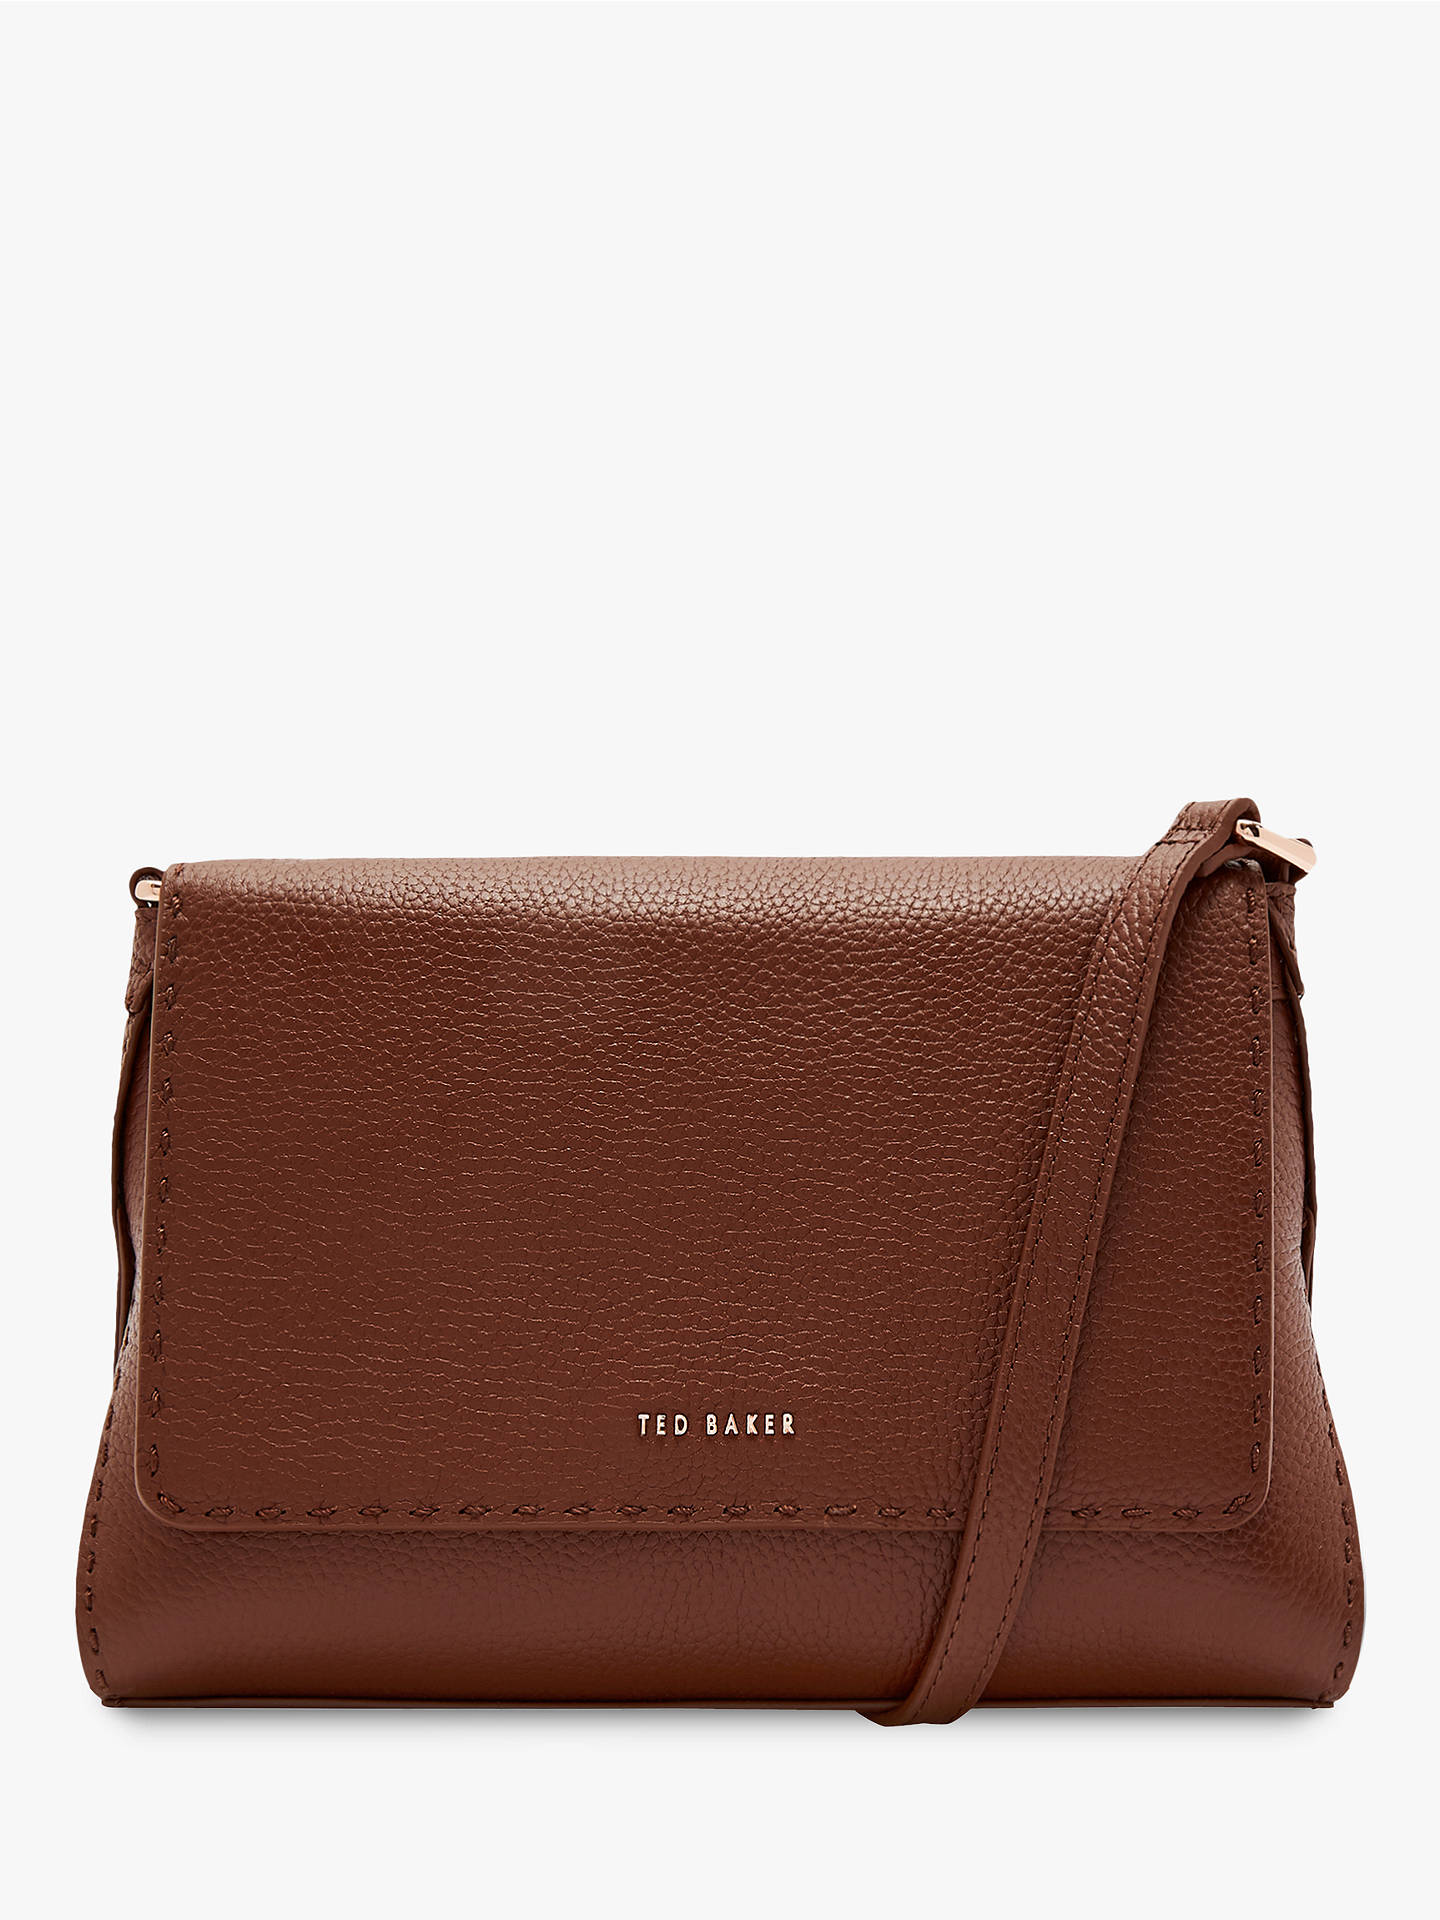 Ted Baker Arista Small Leather Tote Bag at John Lewis & Partners